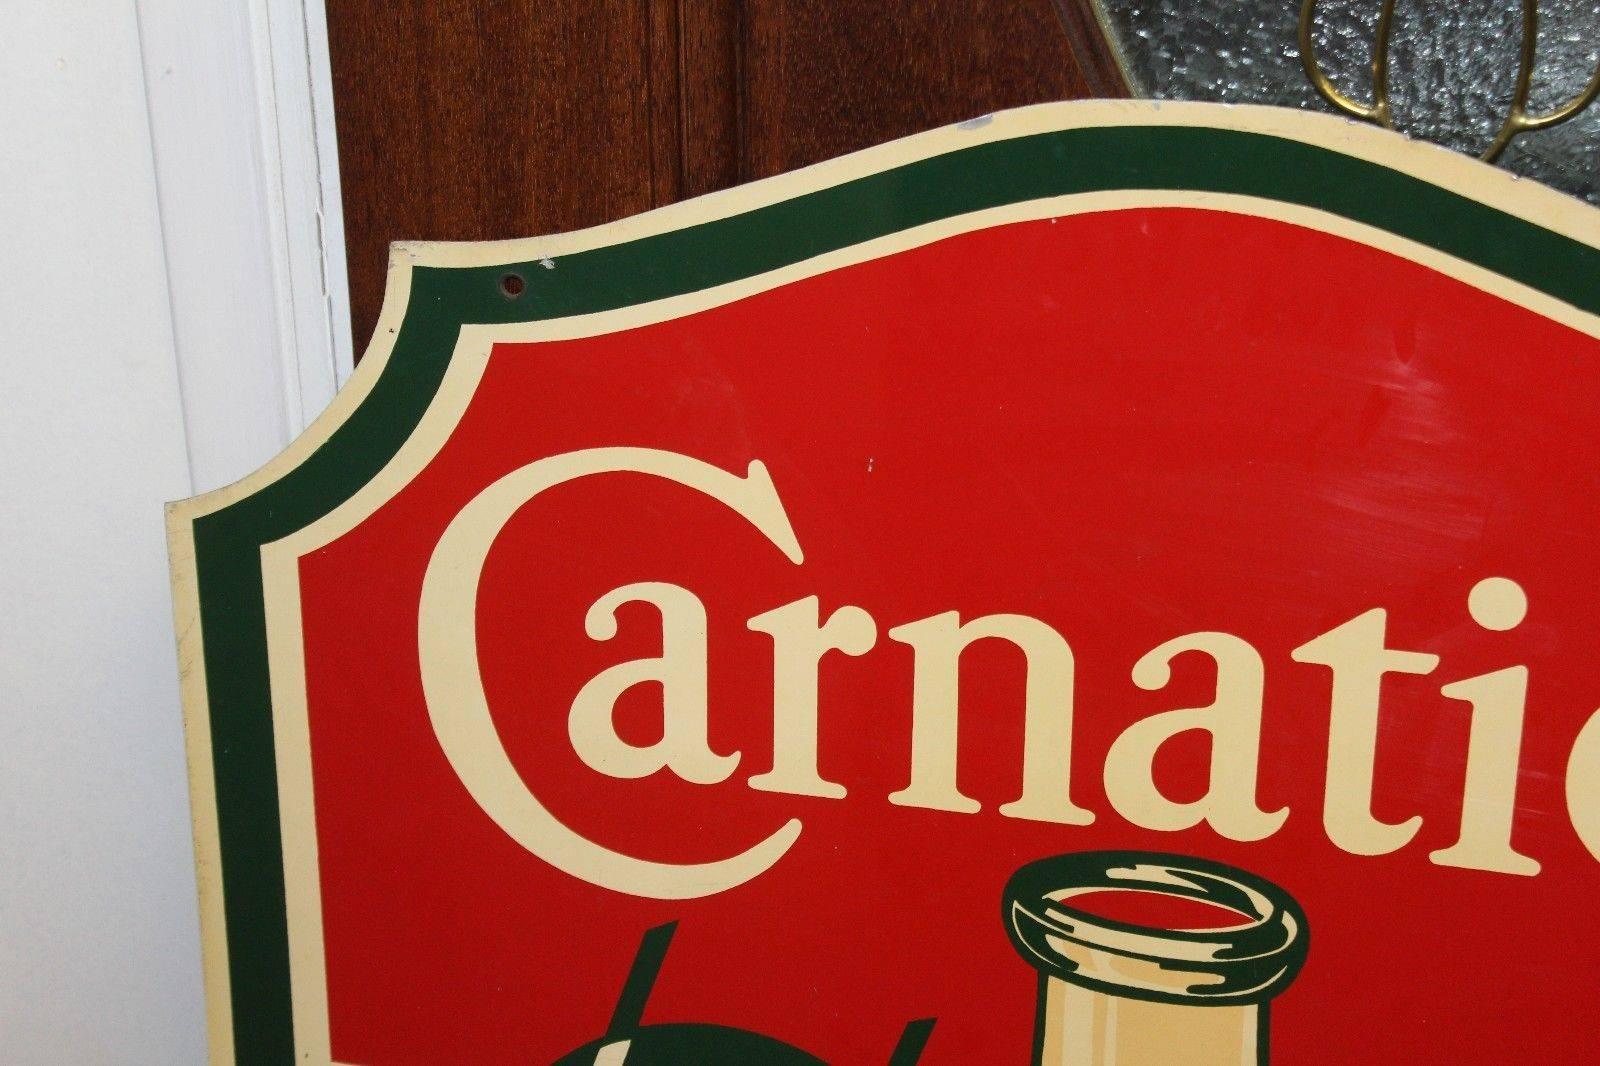 Carnation milk advertising sign was once original owned by Walt Disney Imagineer John Patrick Burke. Great original condition. Amazing die-cut shaped sign that's double sided.